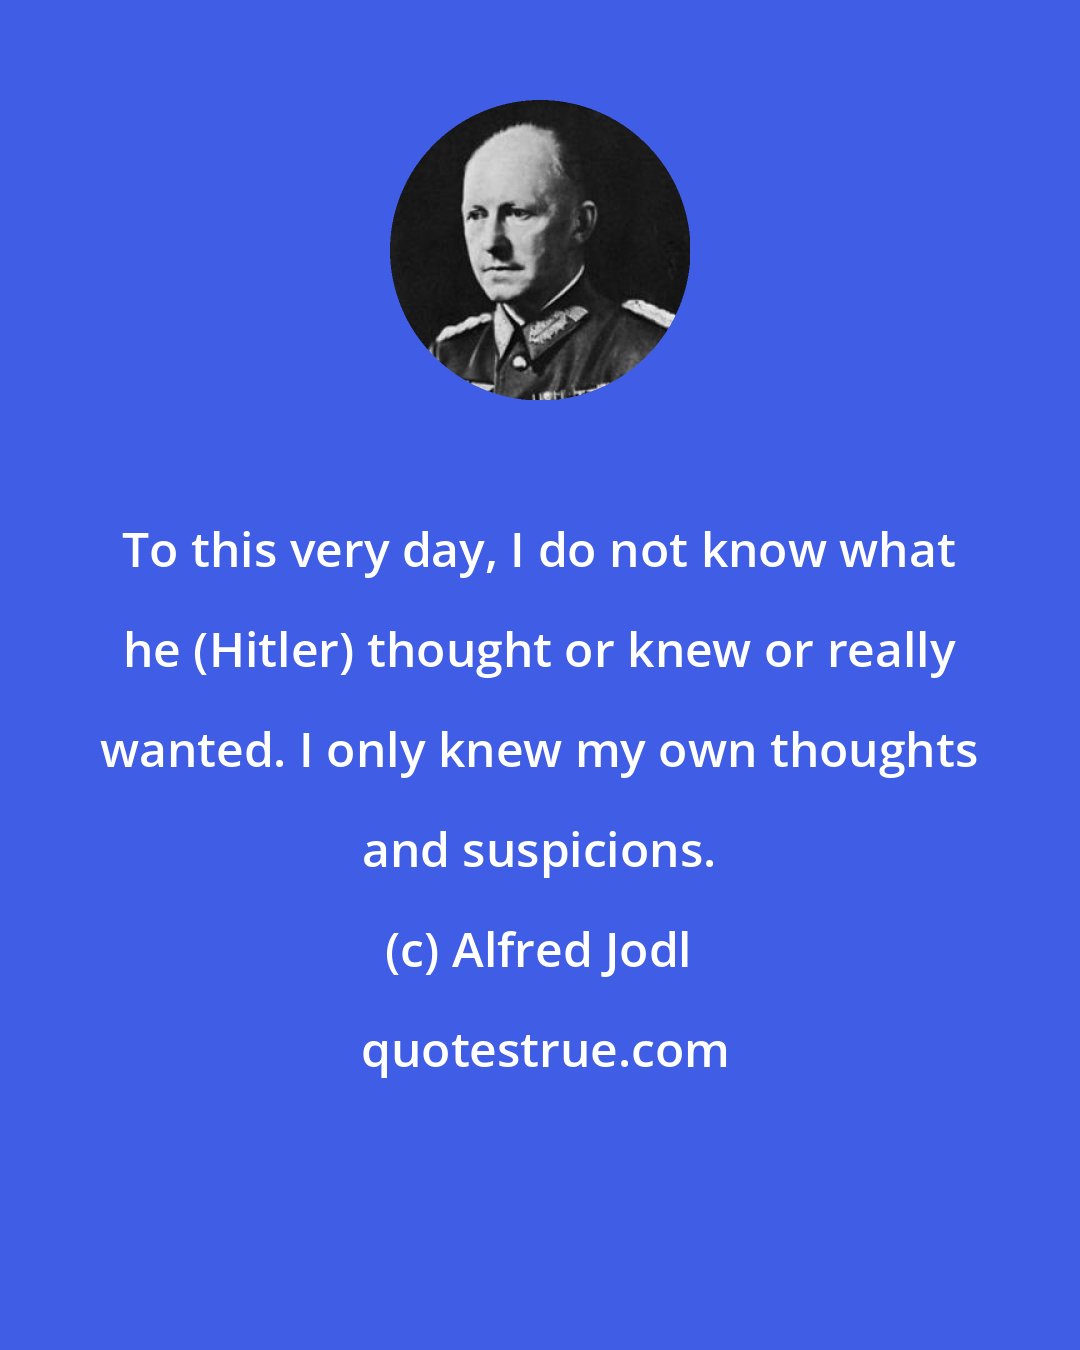 Alfred Jodl: To this very day, I do not know what he (Hitler) thought or knew or really wanted. I only knew my own thoughts and suspicions.